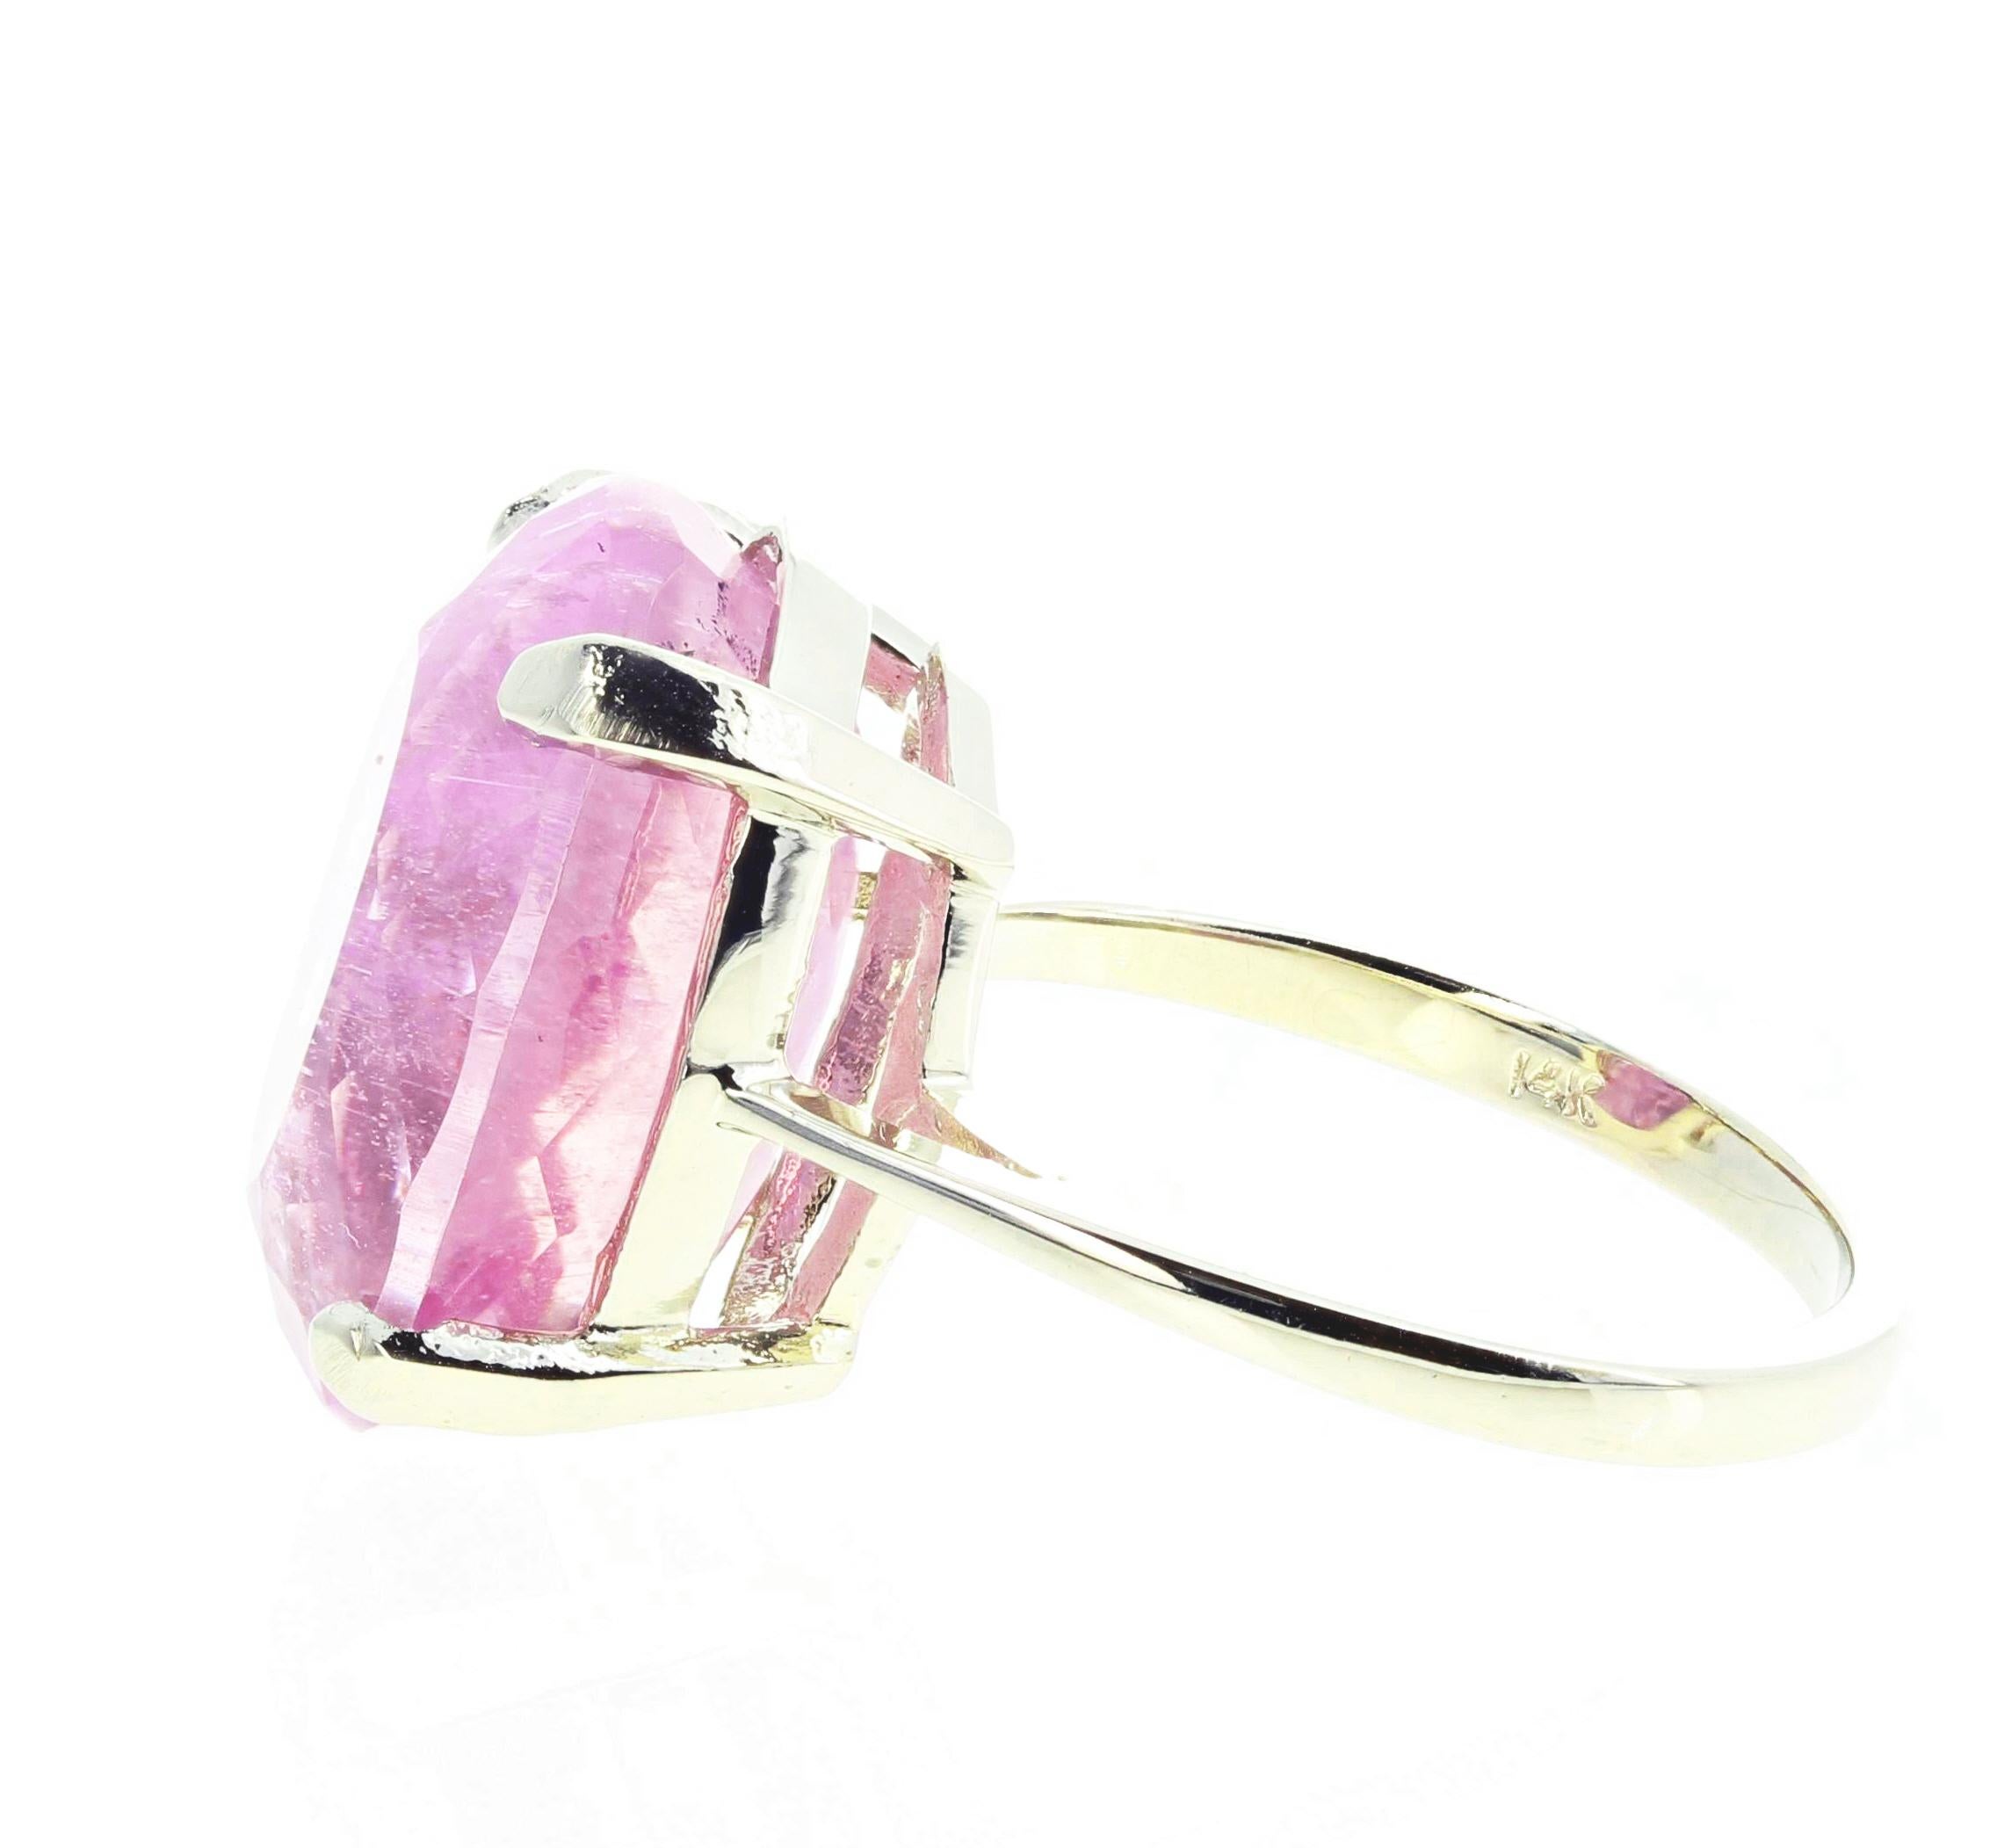 AJD Extraordinarily Rare Clear 14.16Ct PinkyPurple Sparkling Kunzite Silver Ring In New Condition For Sale In Raleigh, NC